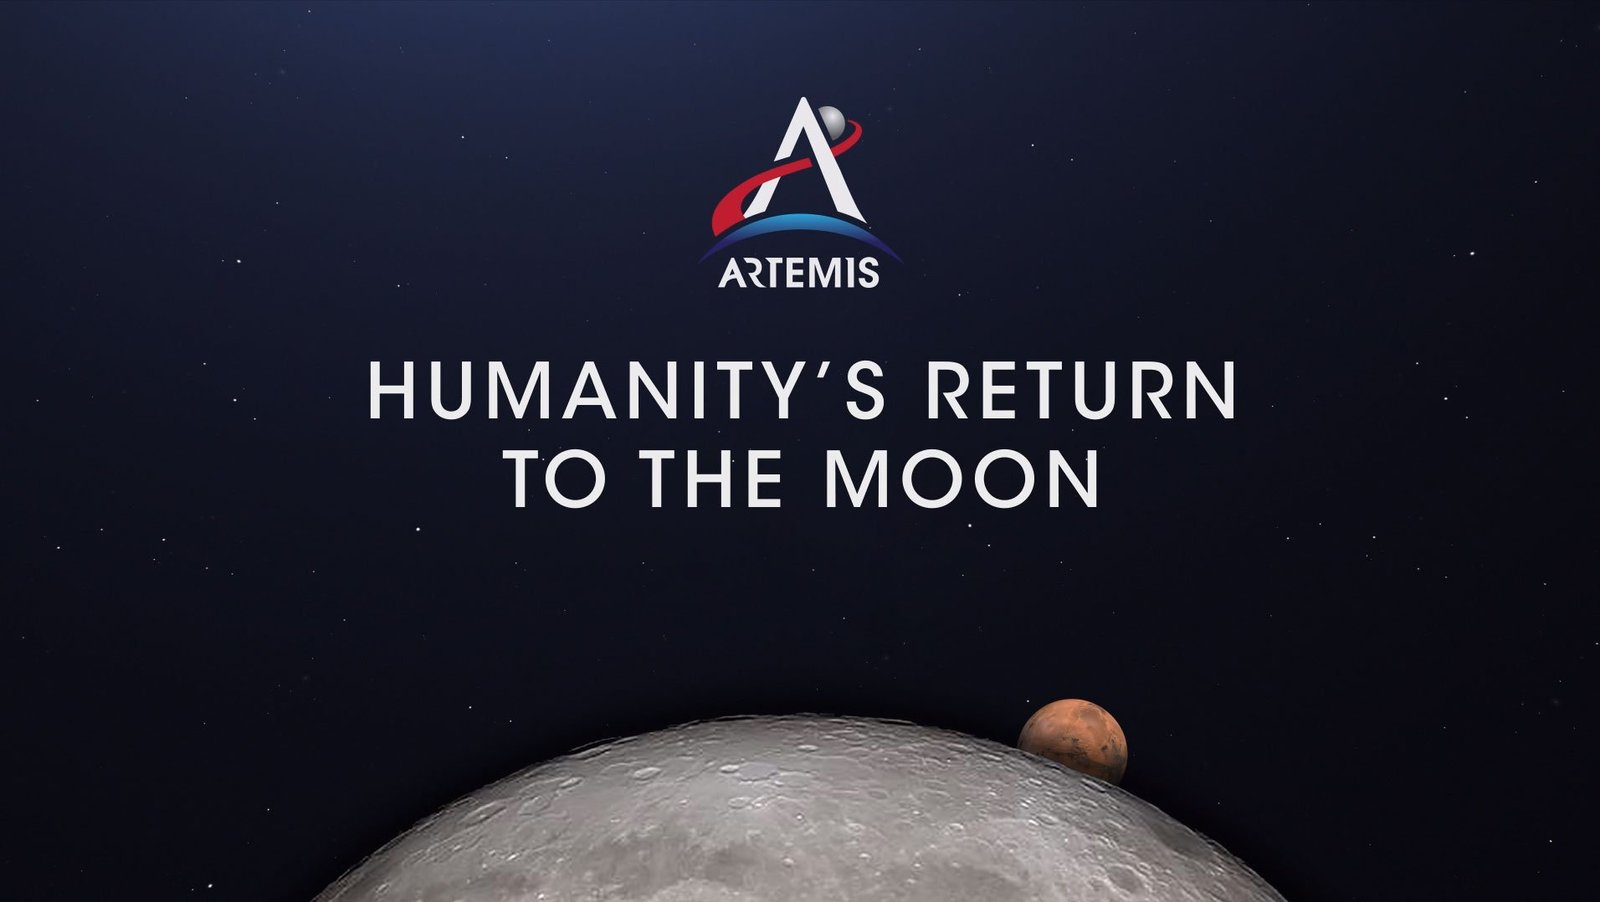 NASA Artemis program: we are going to the moon to stay